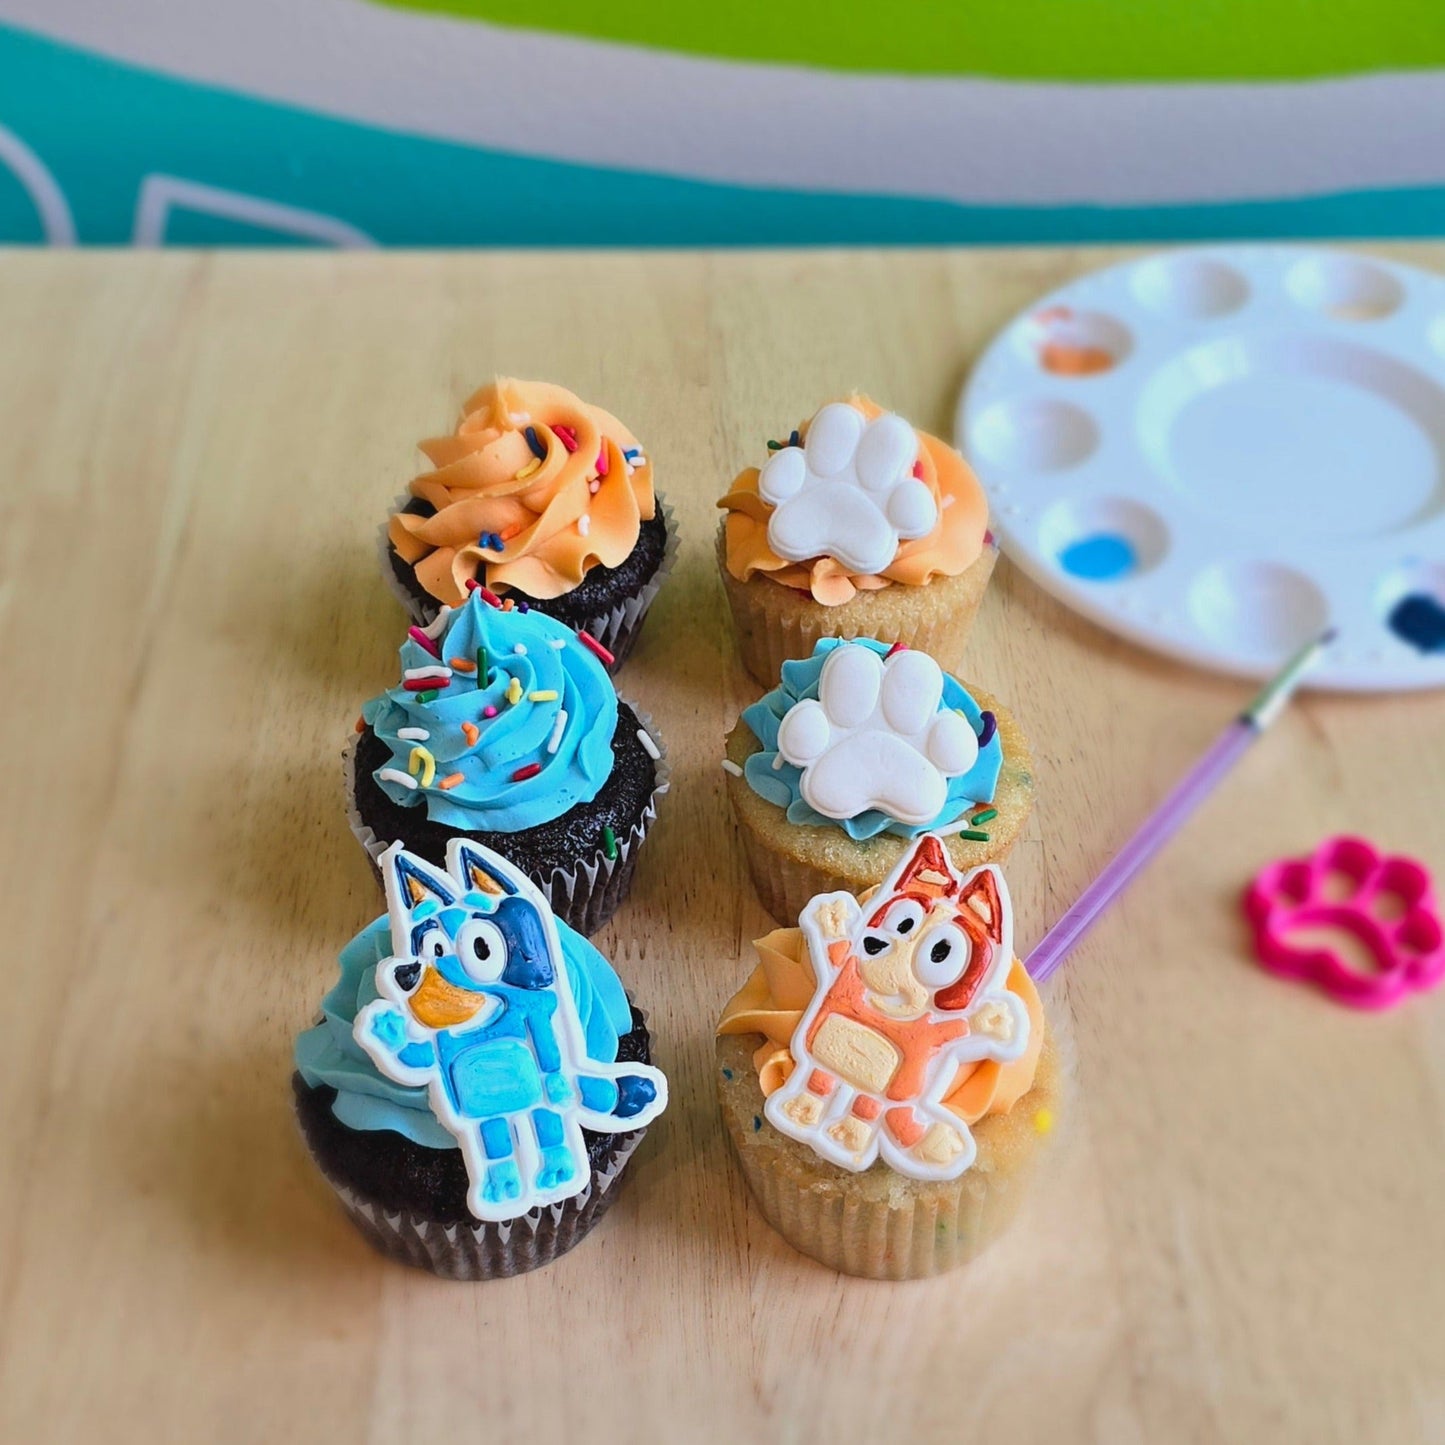 Cupcakes decorated during a DIY cupcake-decorating workshop at Cake Hoopla with blue and orange frosting, fondant dog paws, and blue and red heeler dogs who look like the cartoon characters Bluey and Bingo